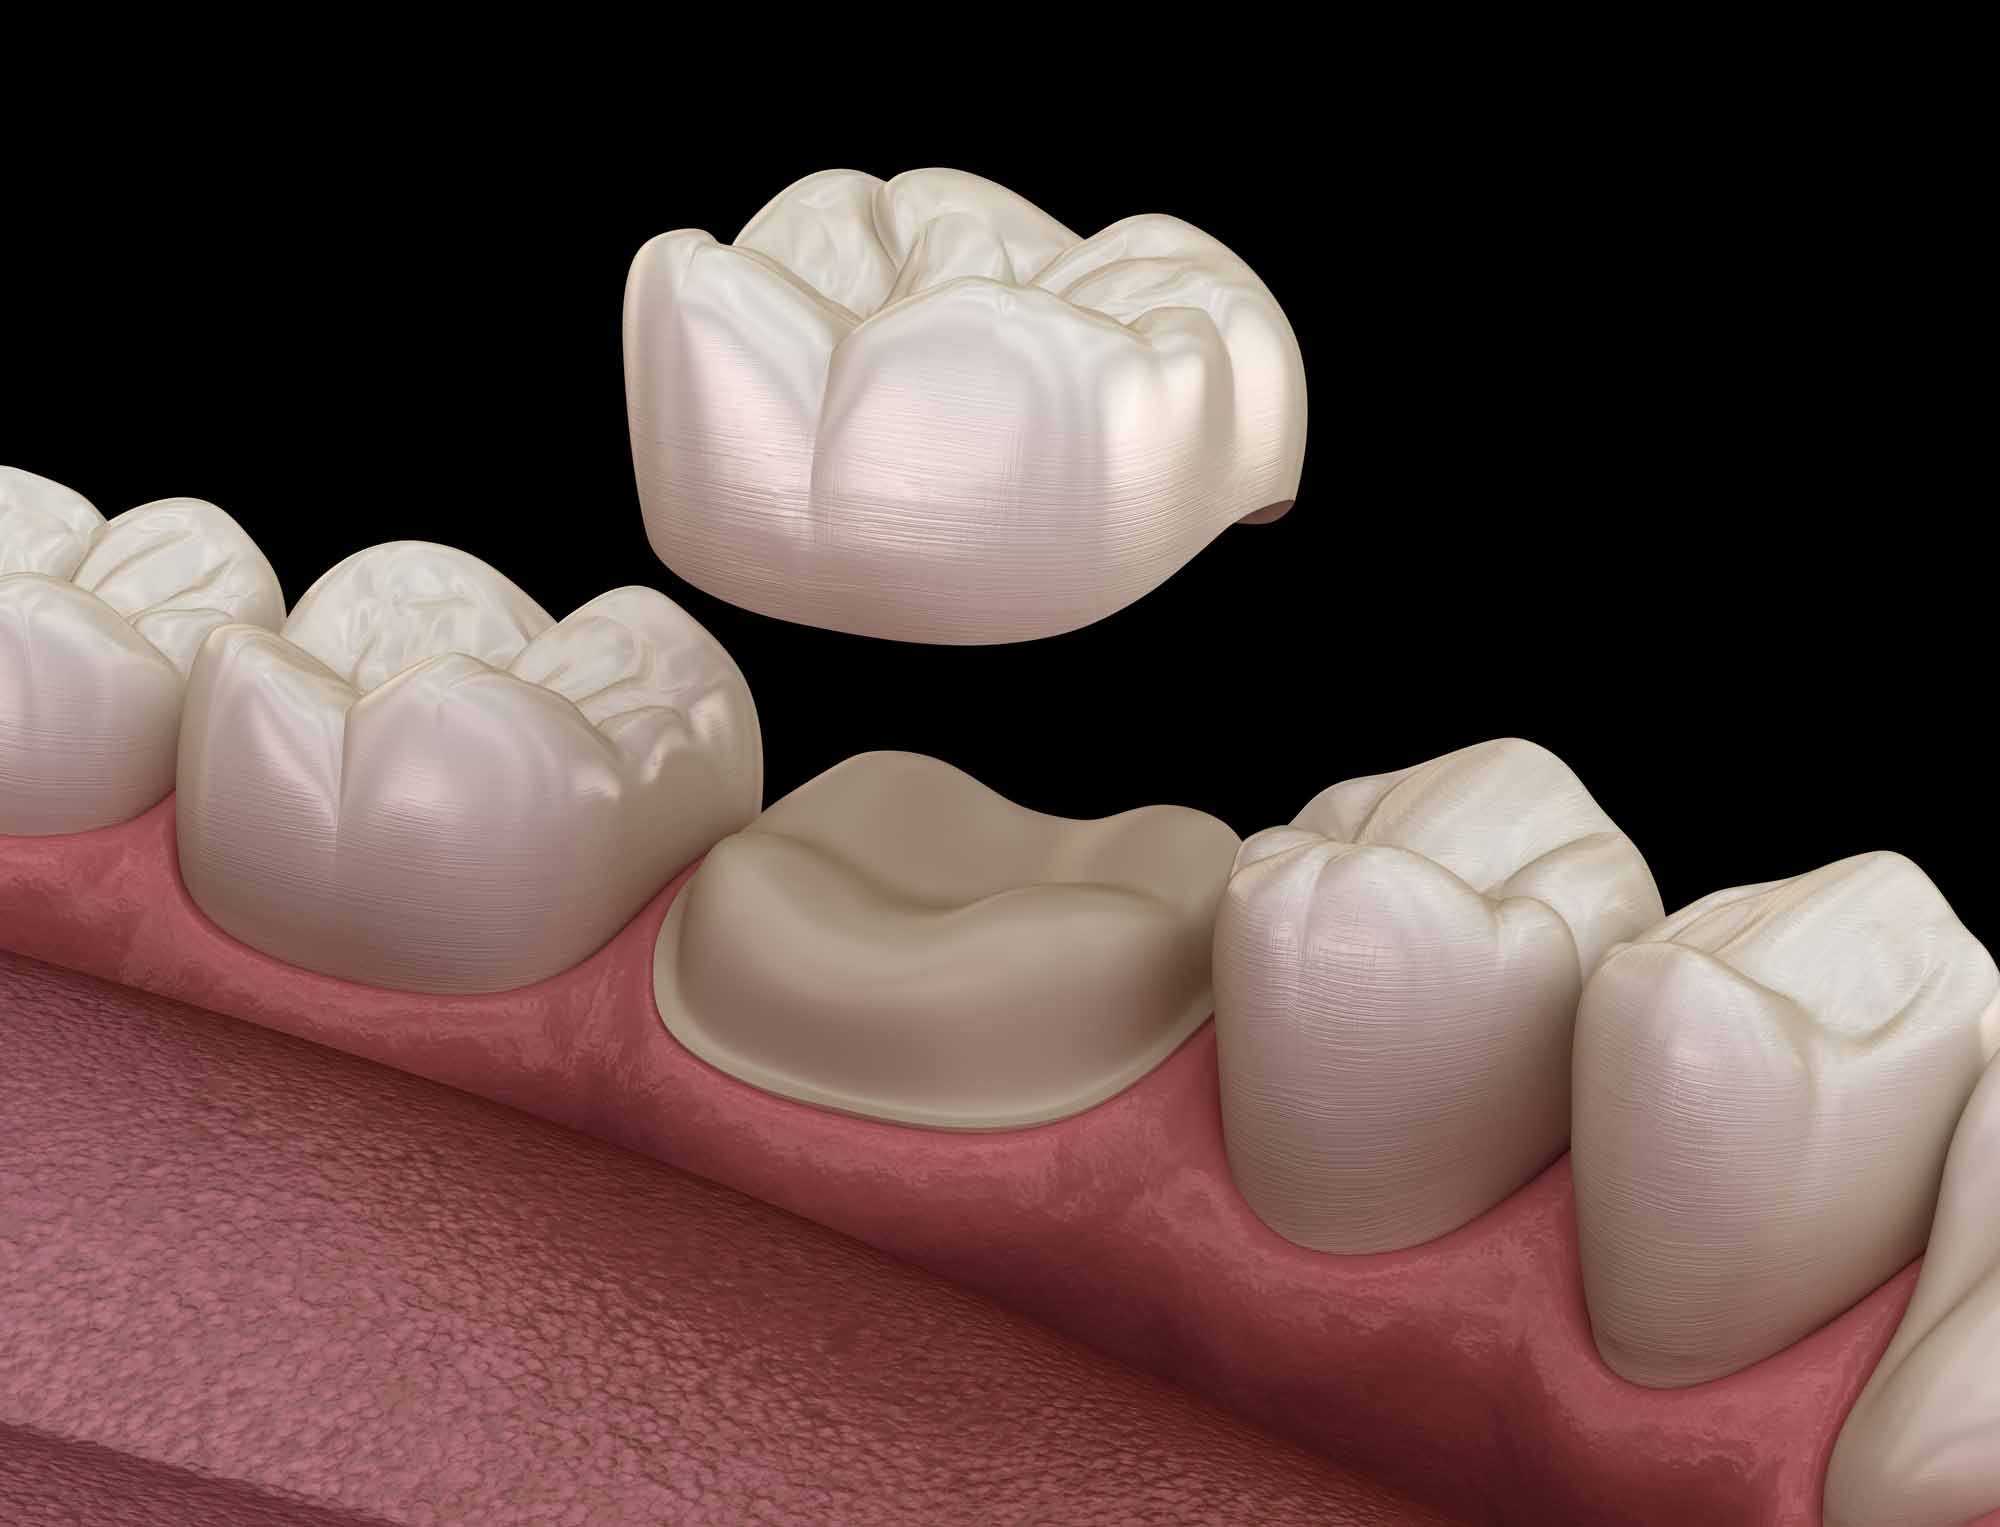 Example of a Dental Crown